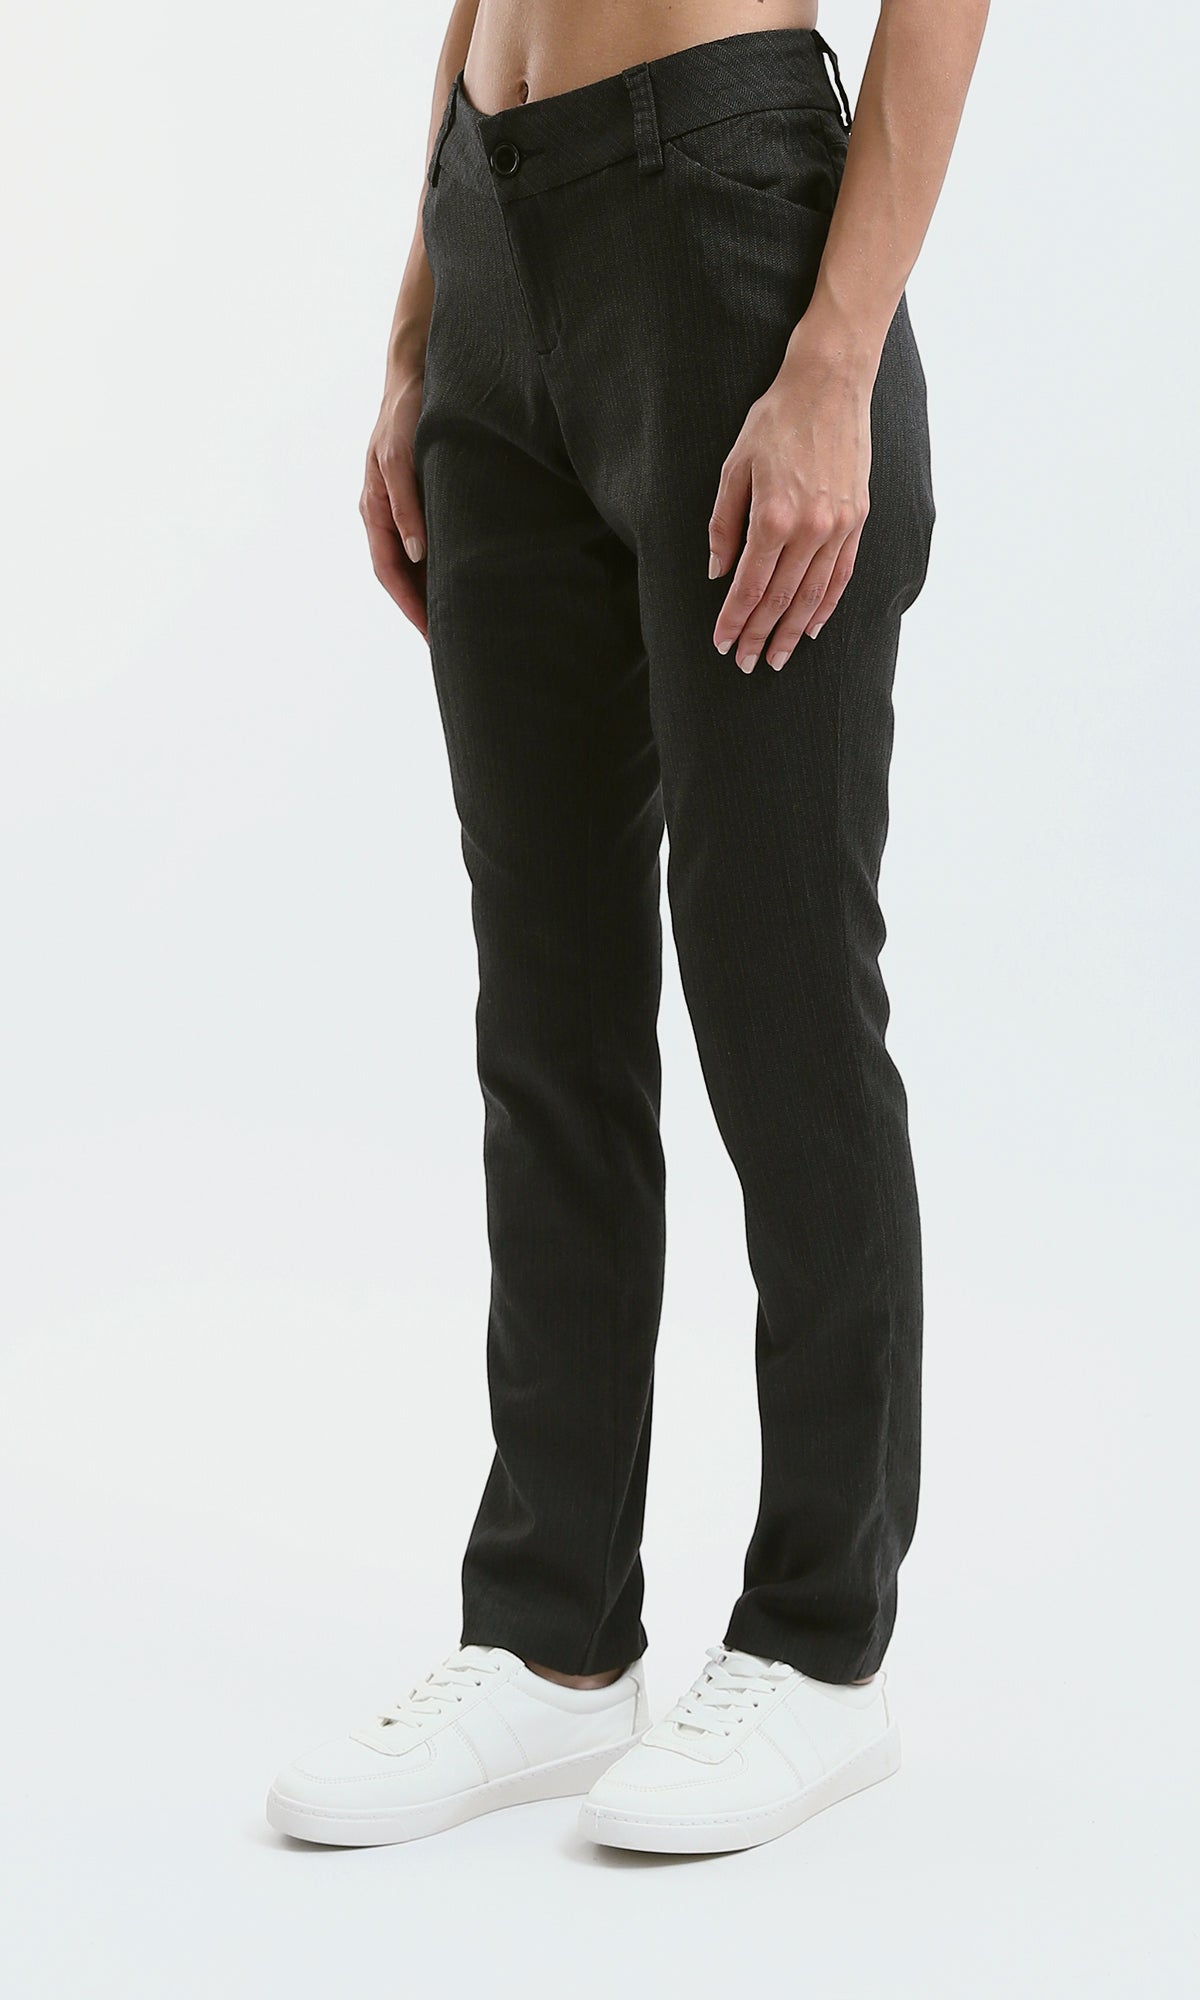 O189393 Dark Grey Straight Fit Patterned Classic Pants